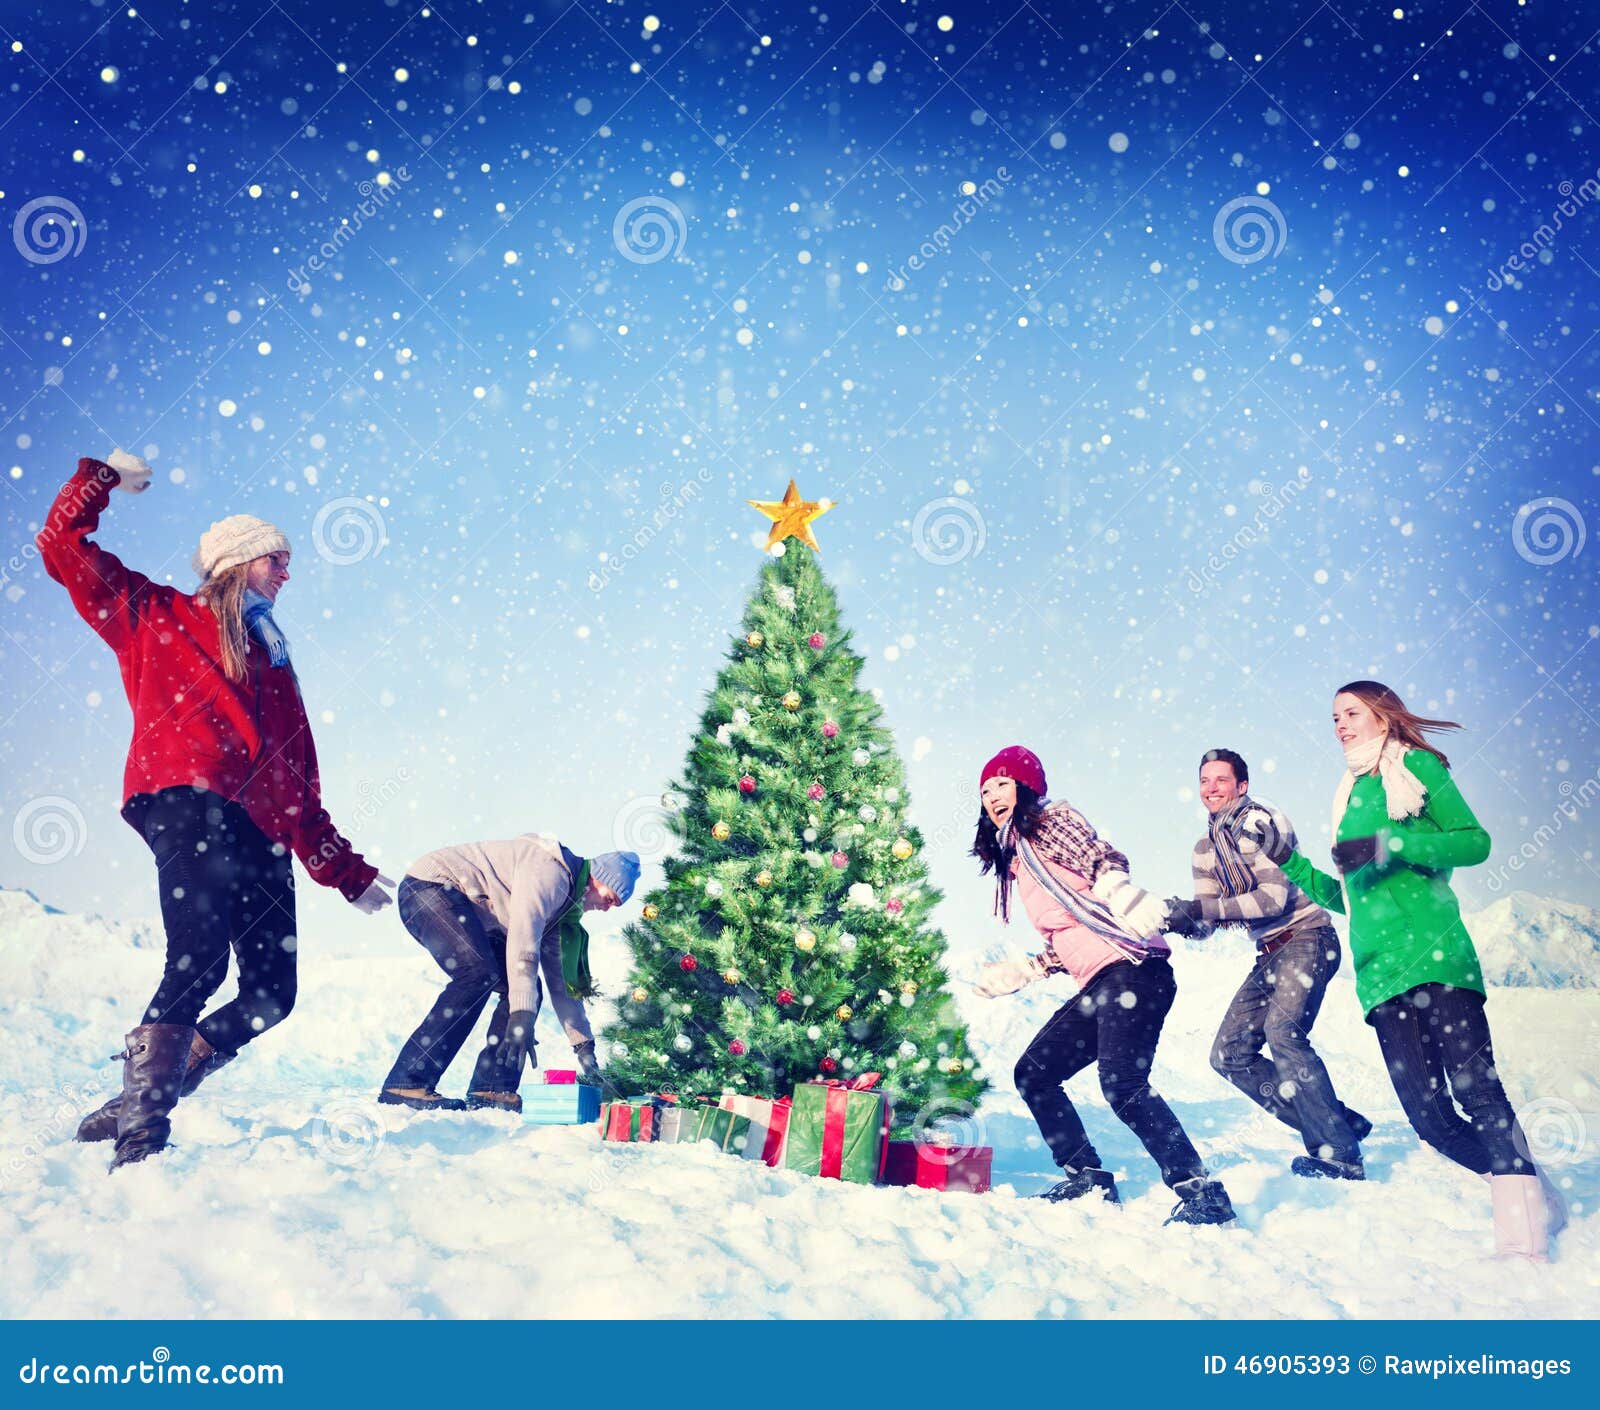 christmas snowball fight winter friends yuletide concept